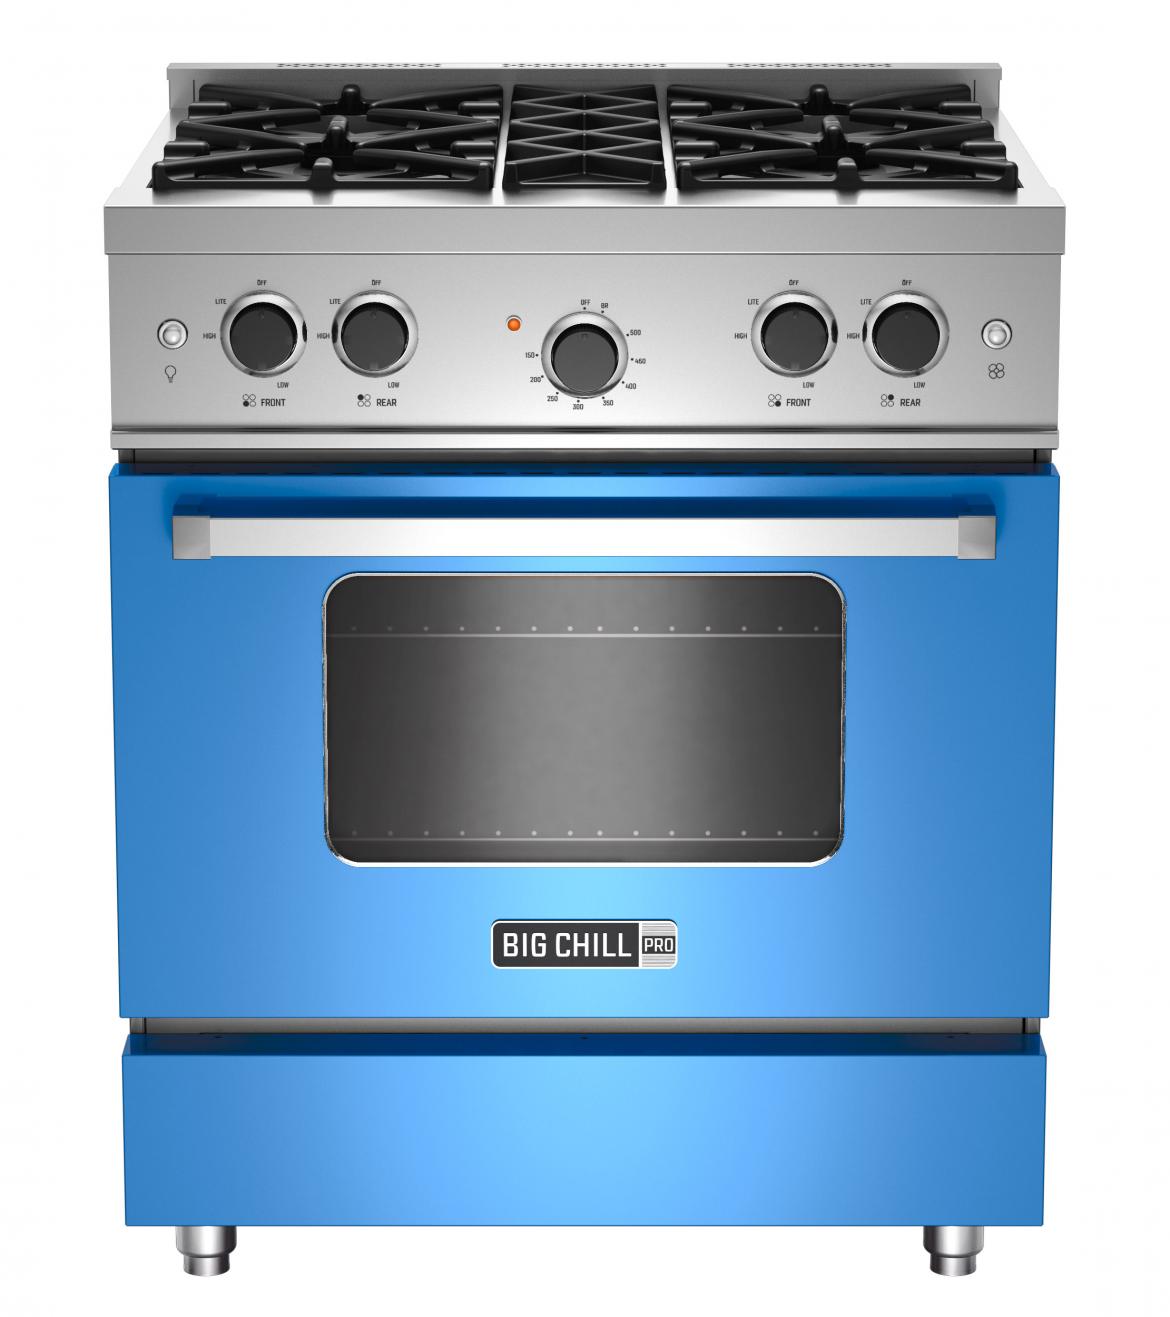 The 30-inch Pro range offers clean lines and bold colors. It features four burners with up to 18,000 BTUs, continuous grates, and a large-capacity oven. It comes in a range of standard colors or 200 custom hues.